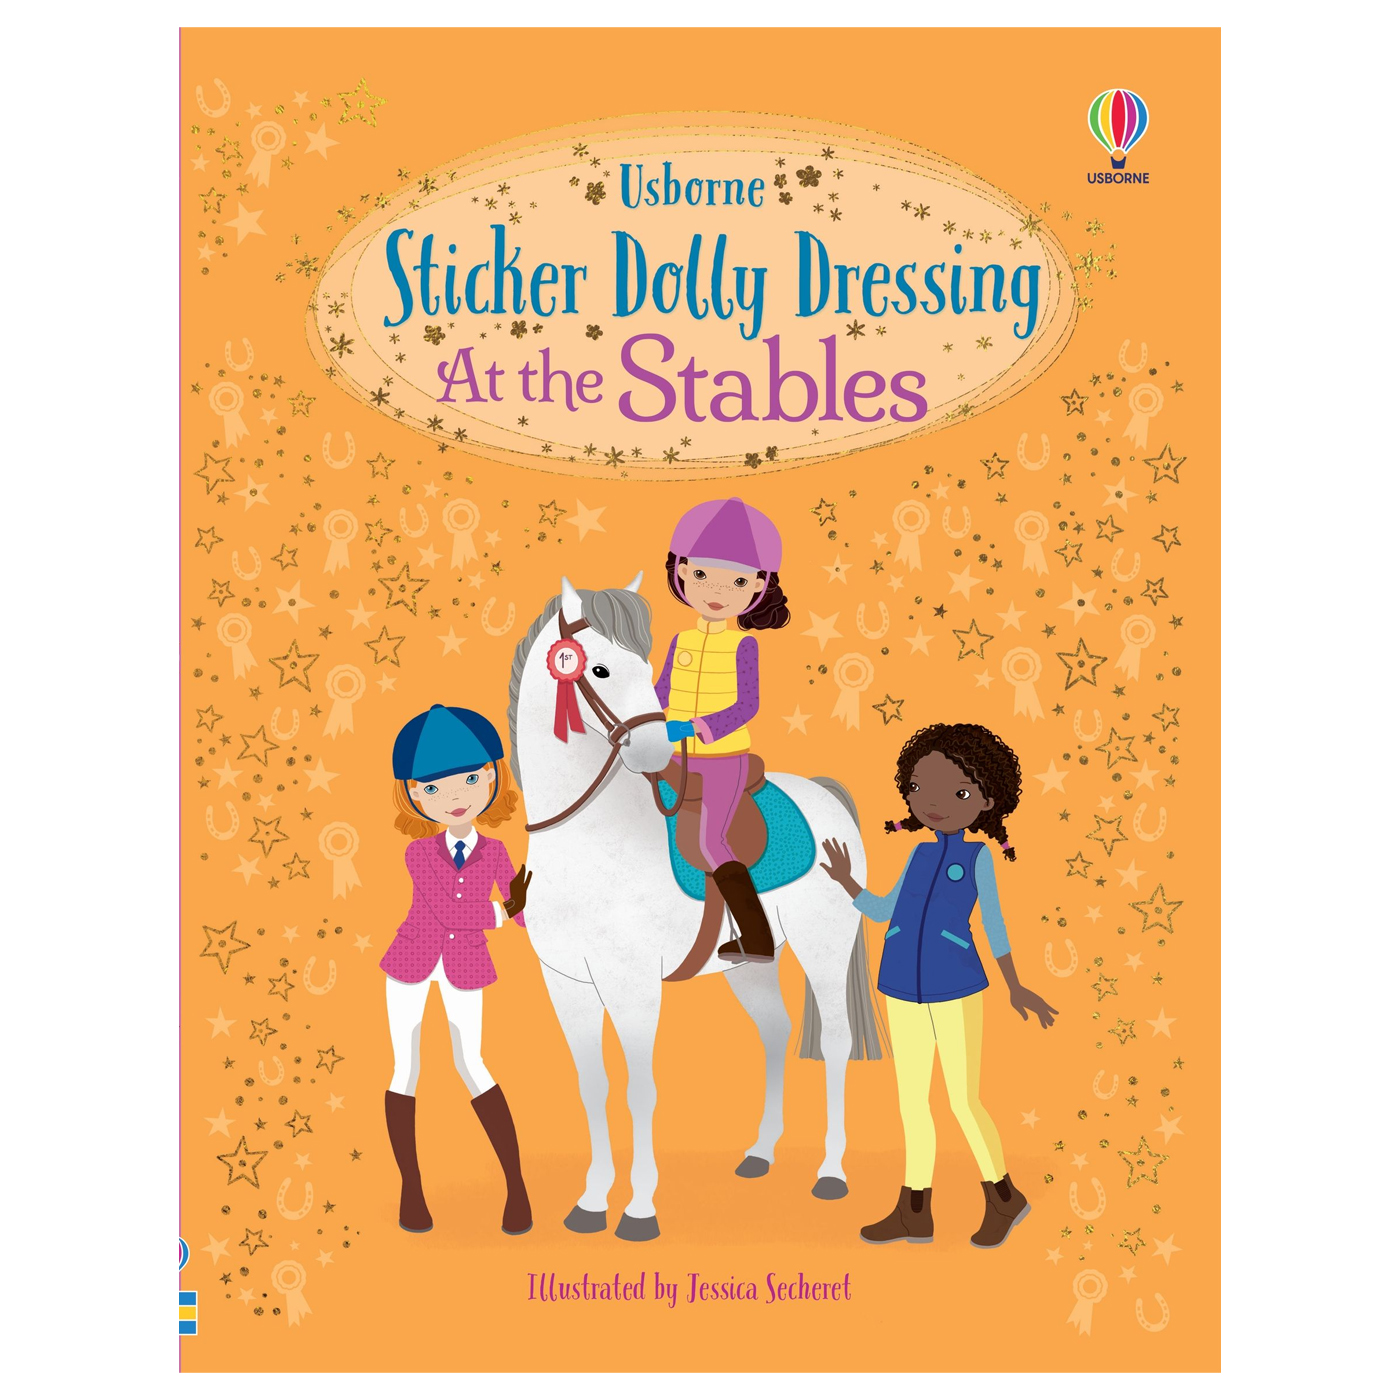 USBORNE Sticker Dolly Dressing At the Stables